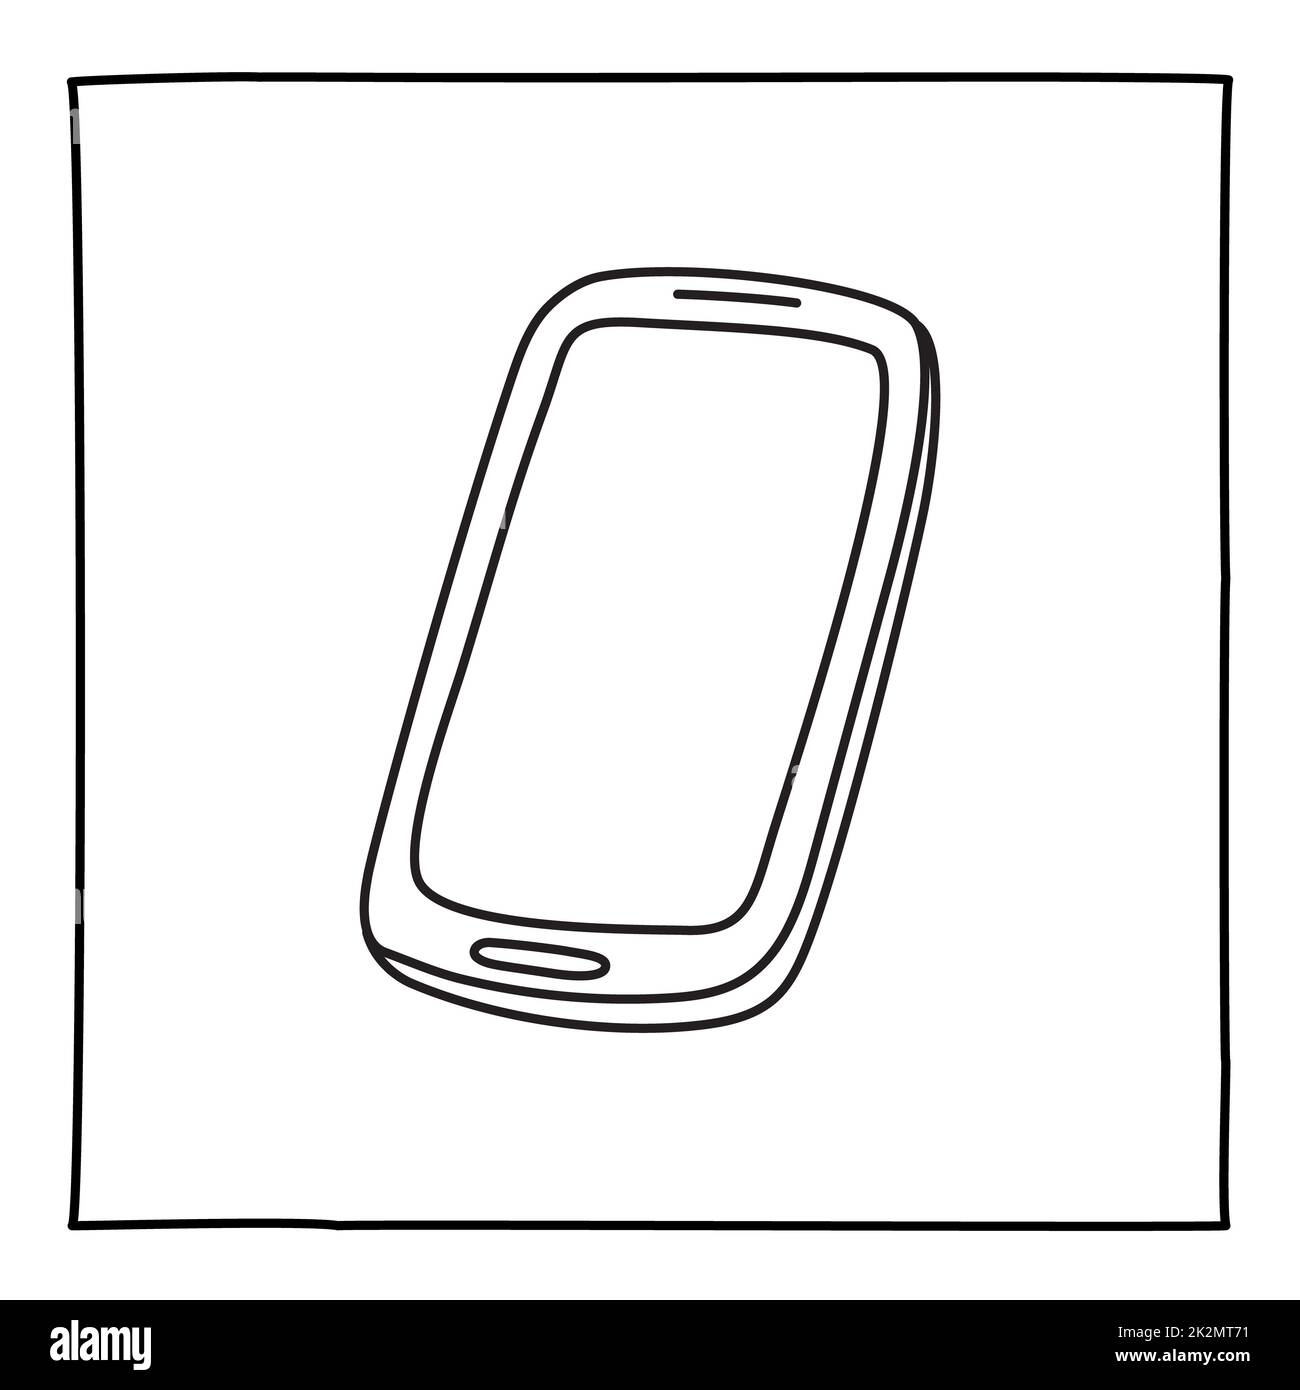 Doodle mobile phone icon hand drawn with thin line Stock Photo